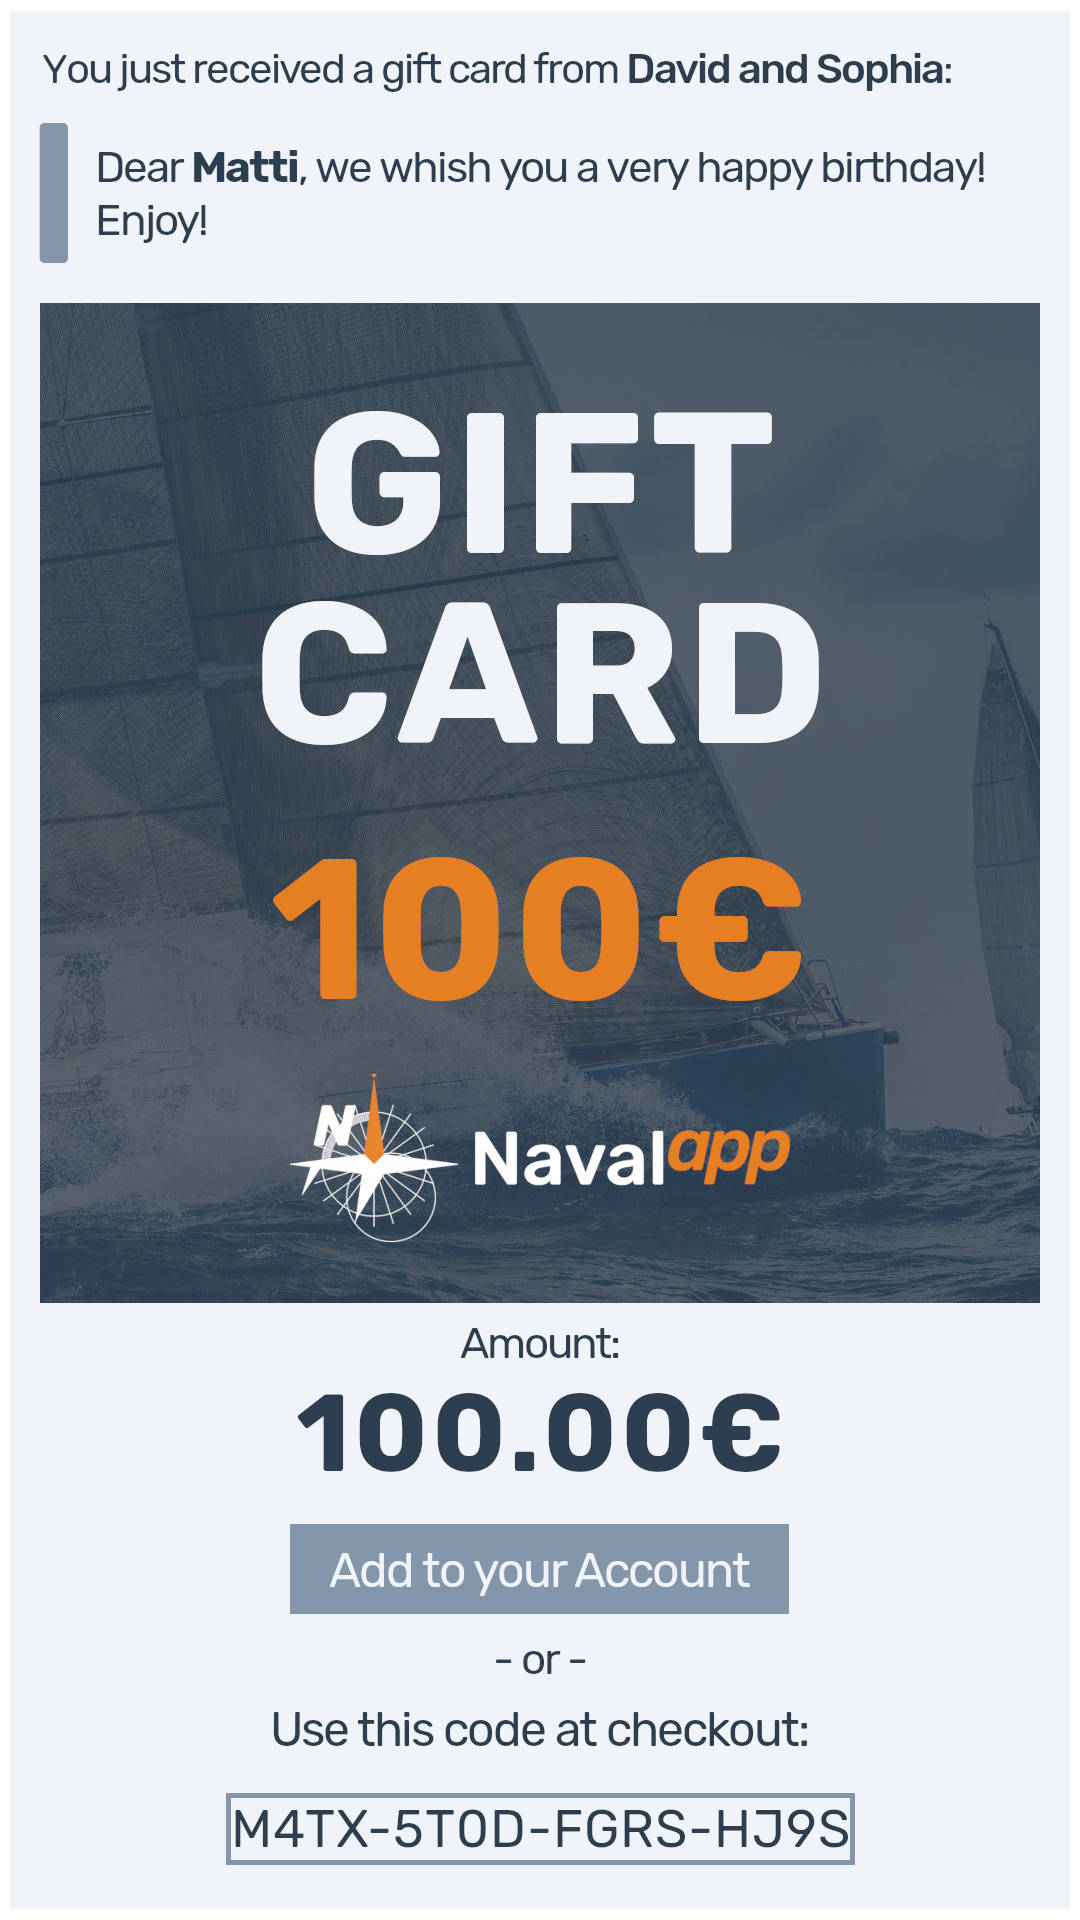 Navalapp - Gift Card email